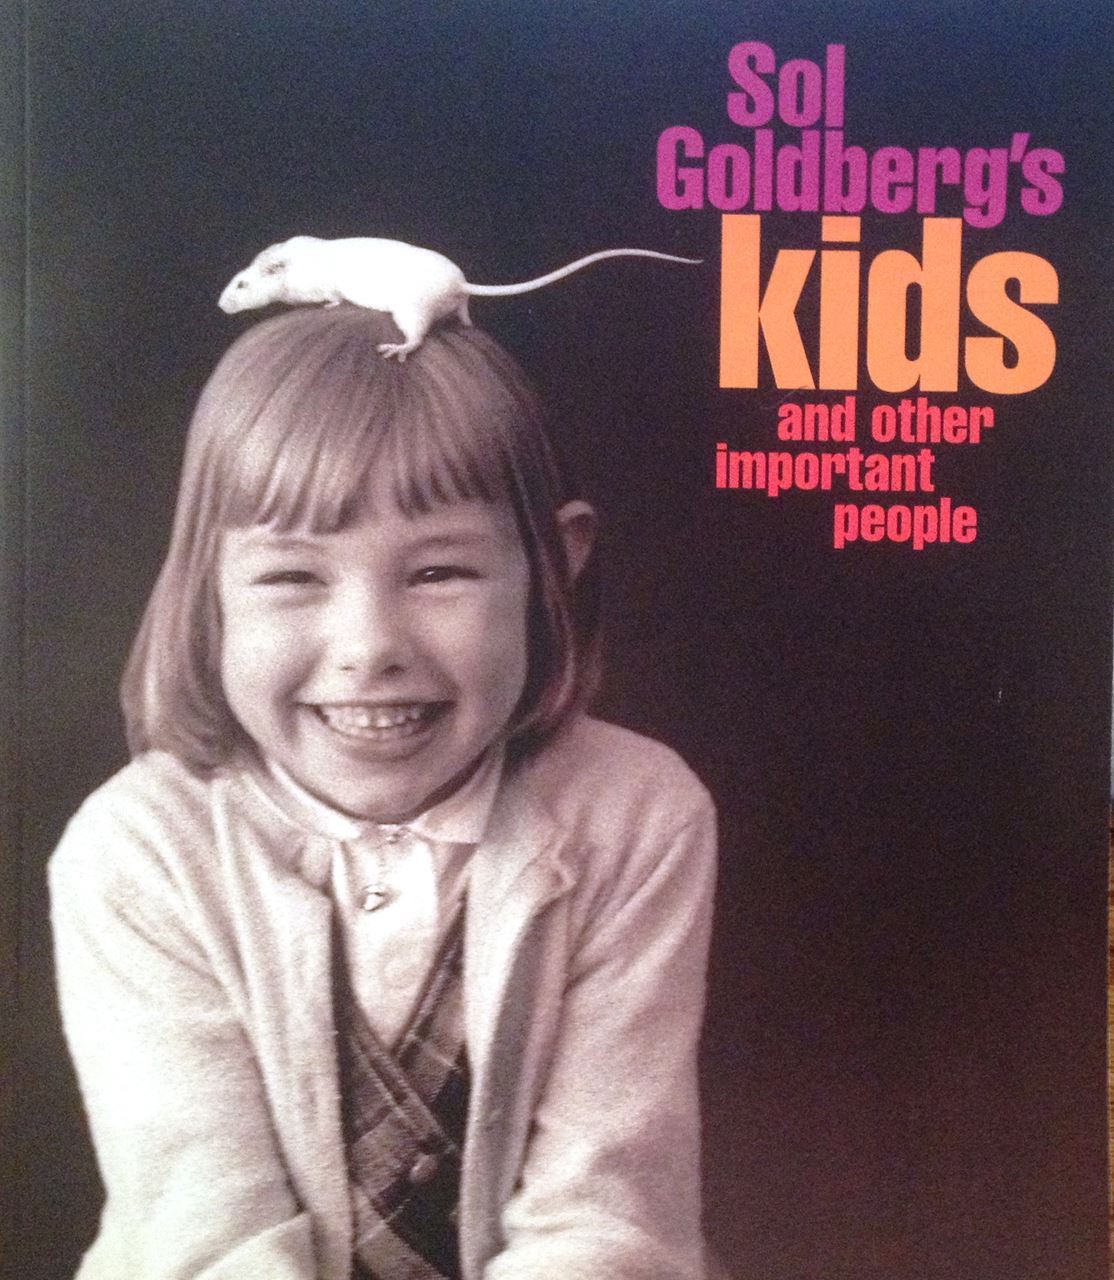 Sol Goldbergs: Kids and other important people